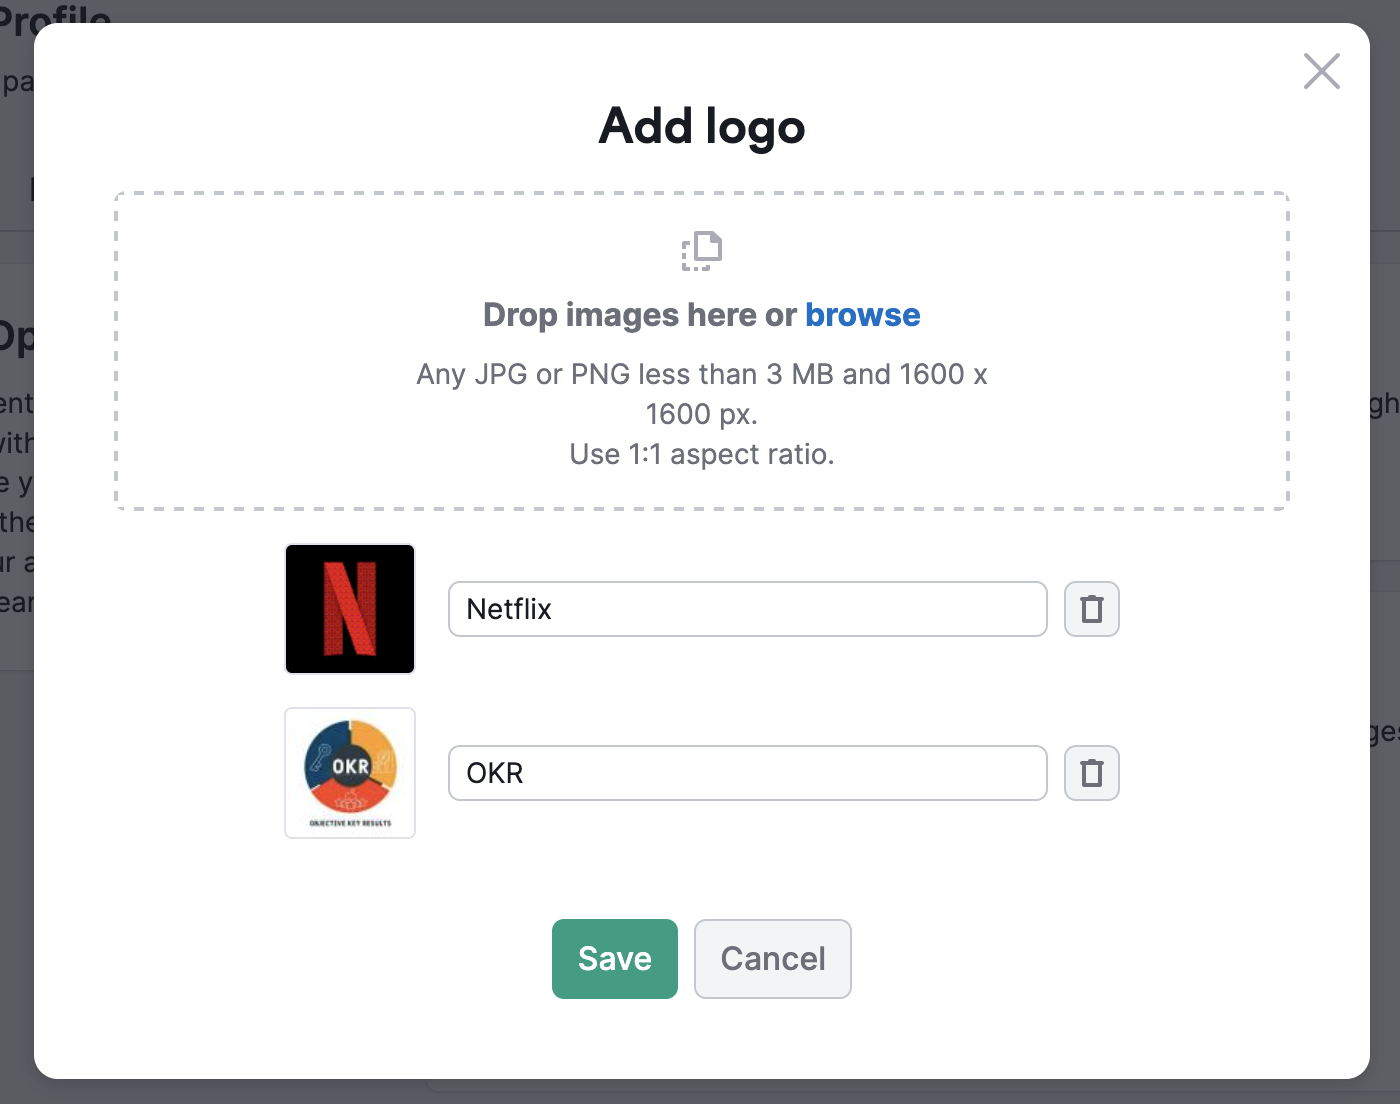 A pop-up window for adding a logo. It contains a field where you can drop an image or upload one from a device. The technical limitation explains: Any JPG or PNG less than 3MB and 1600 x 1600 px. Below the image field, there is an option to add and edit descriptions for already uploaded logos.